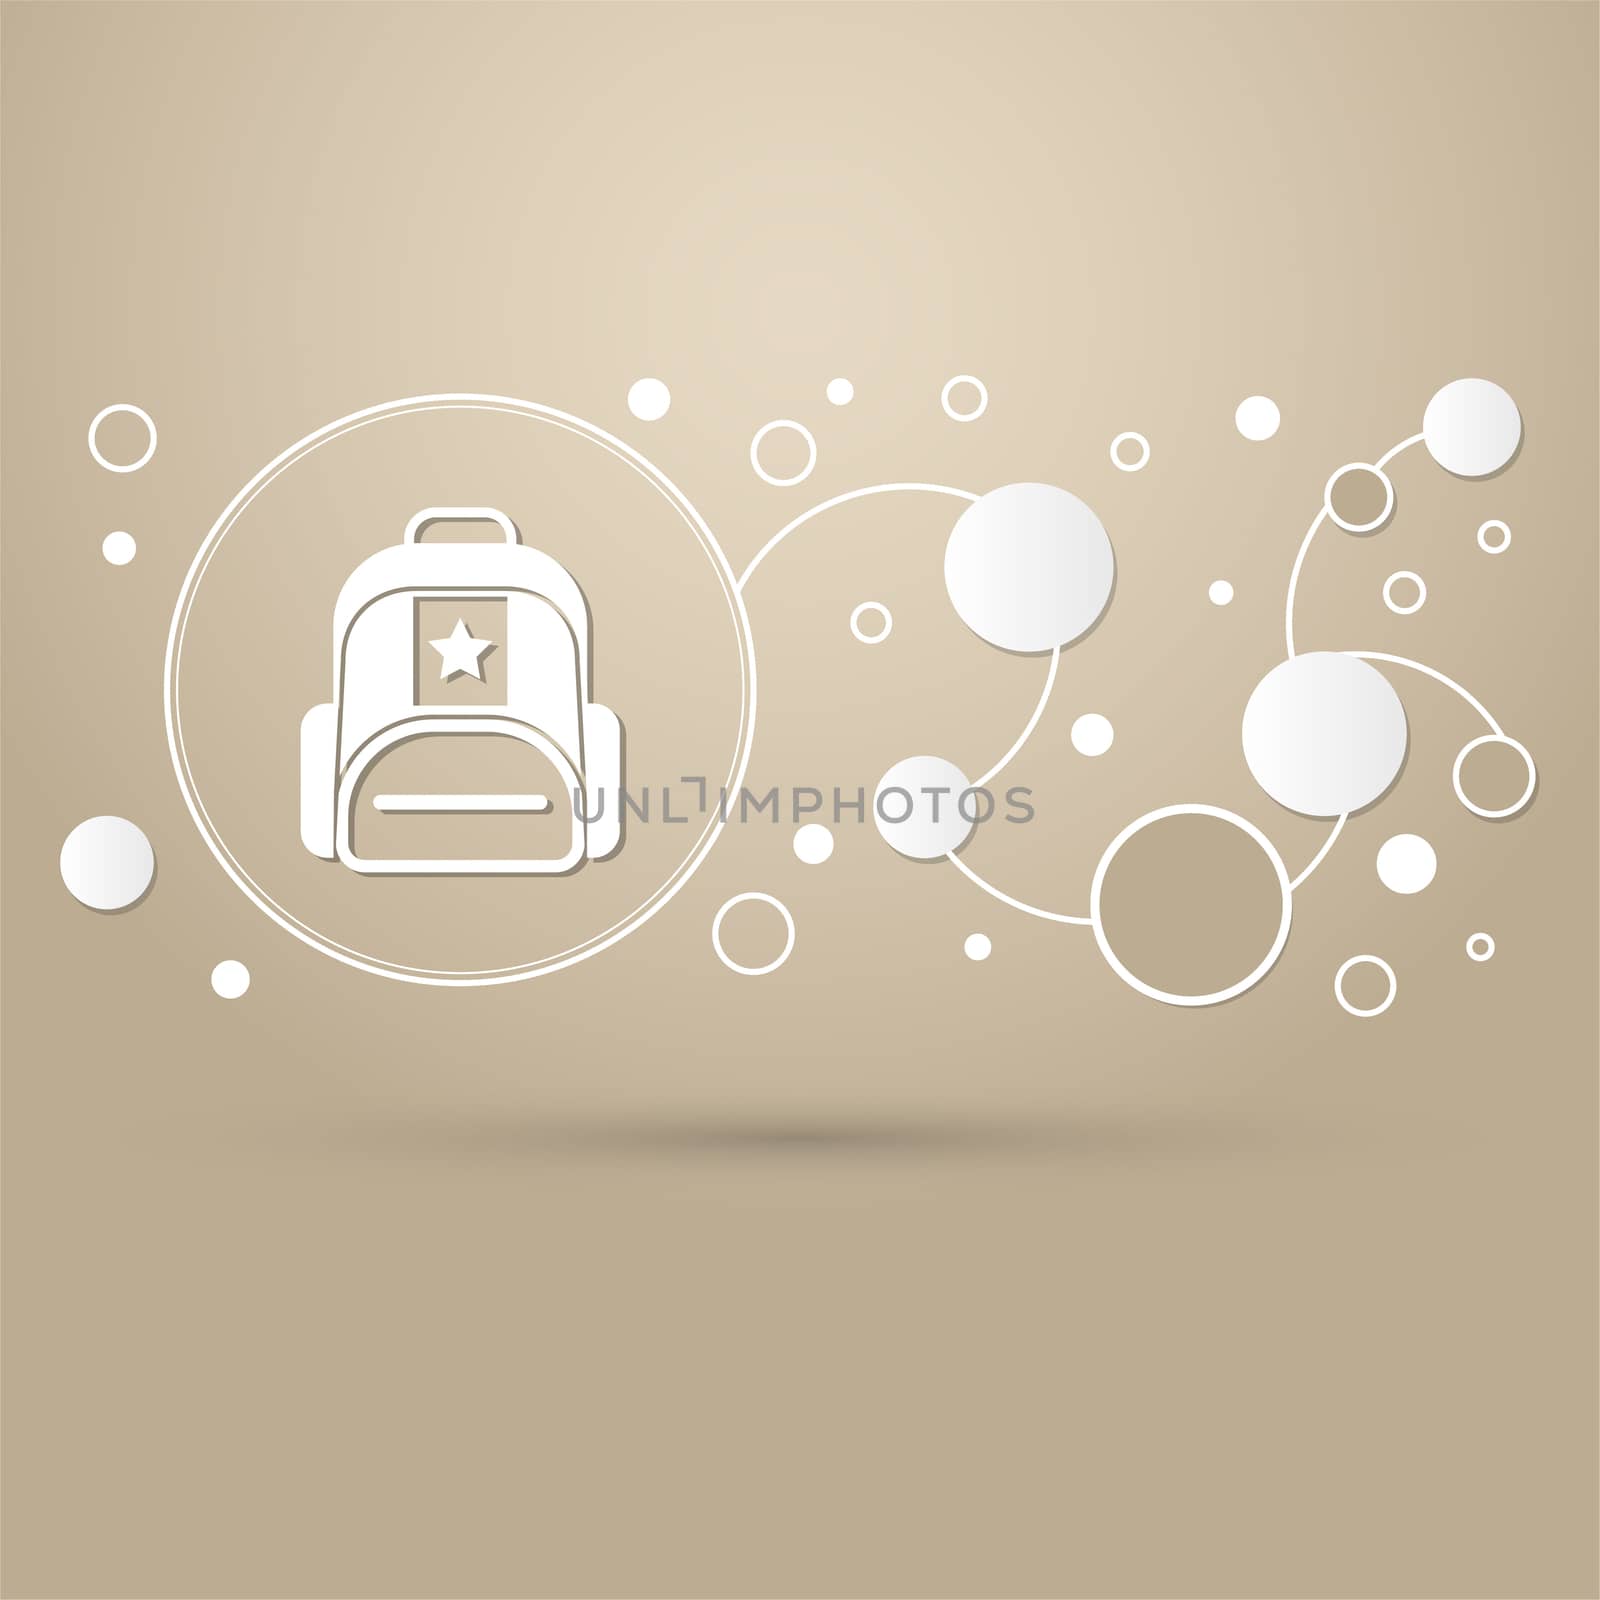 Briefcase, case, bag icon on a brown background with elegant style and modern design infographic. illustration